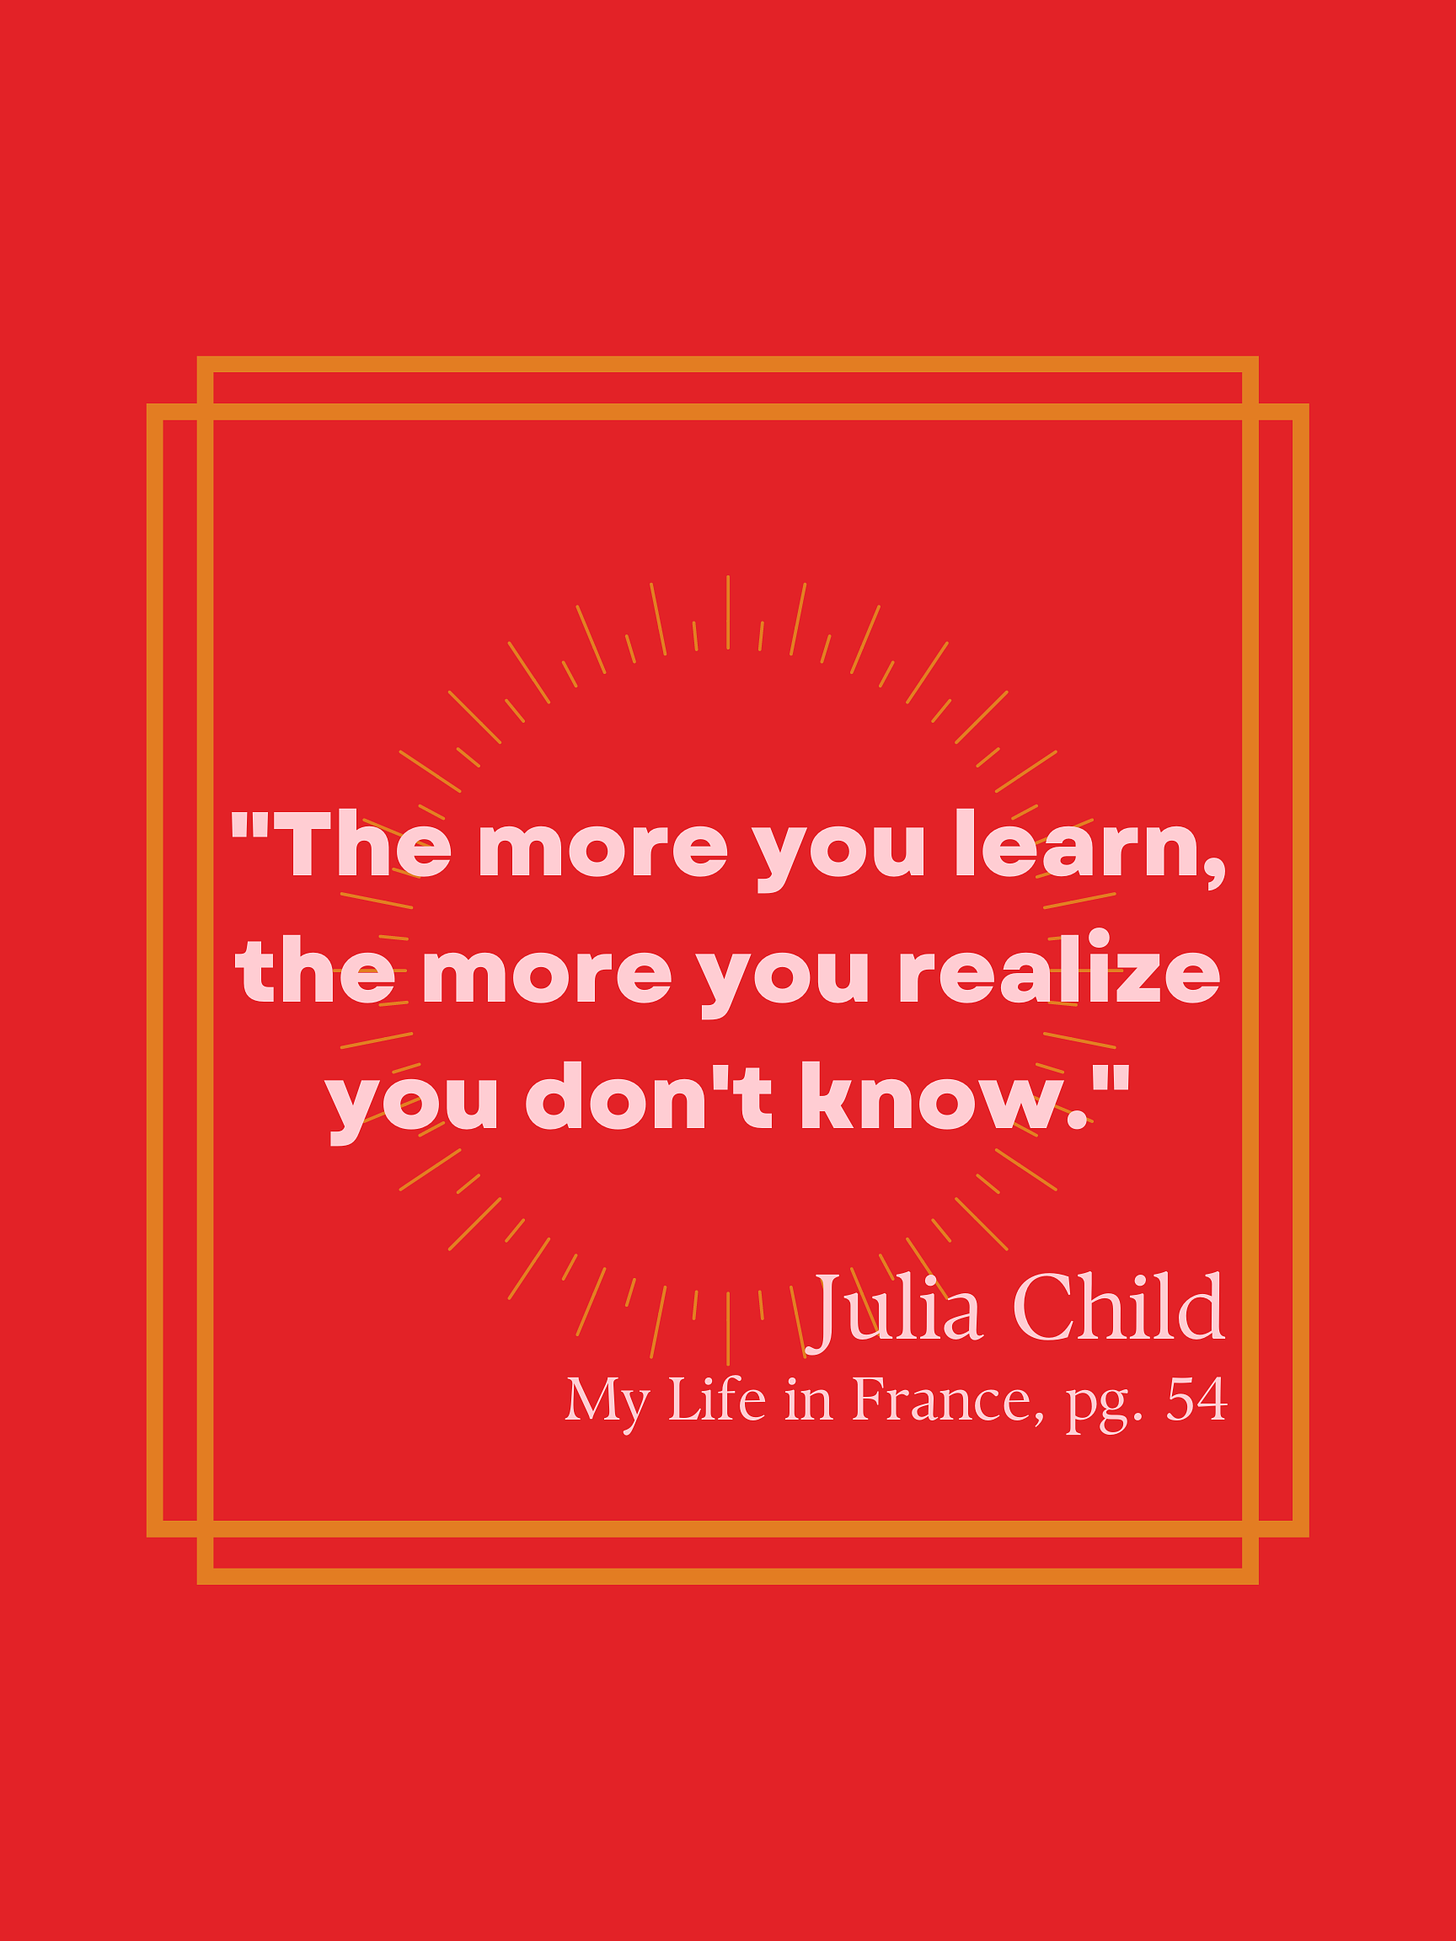 "The more you learn, the more you realize you don't know." Julia Child. My Life in France, pg. 54